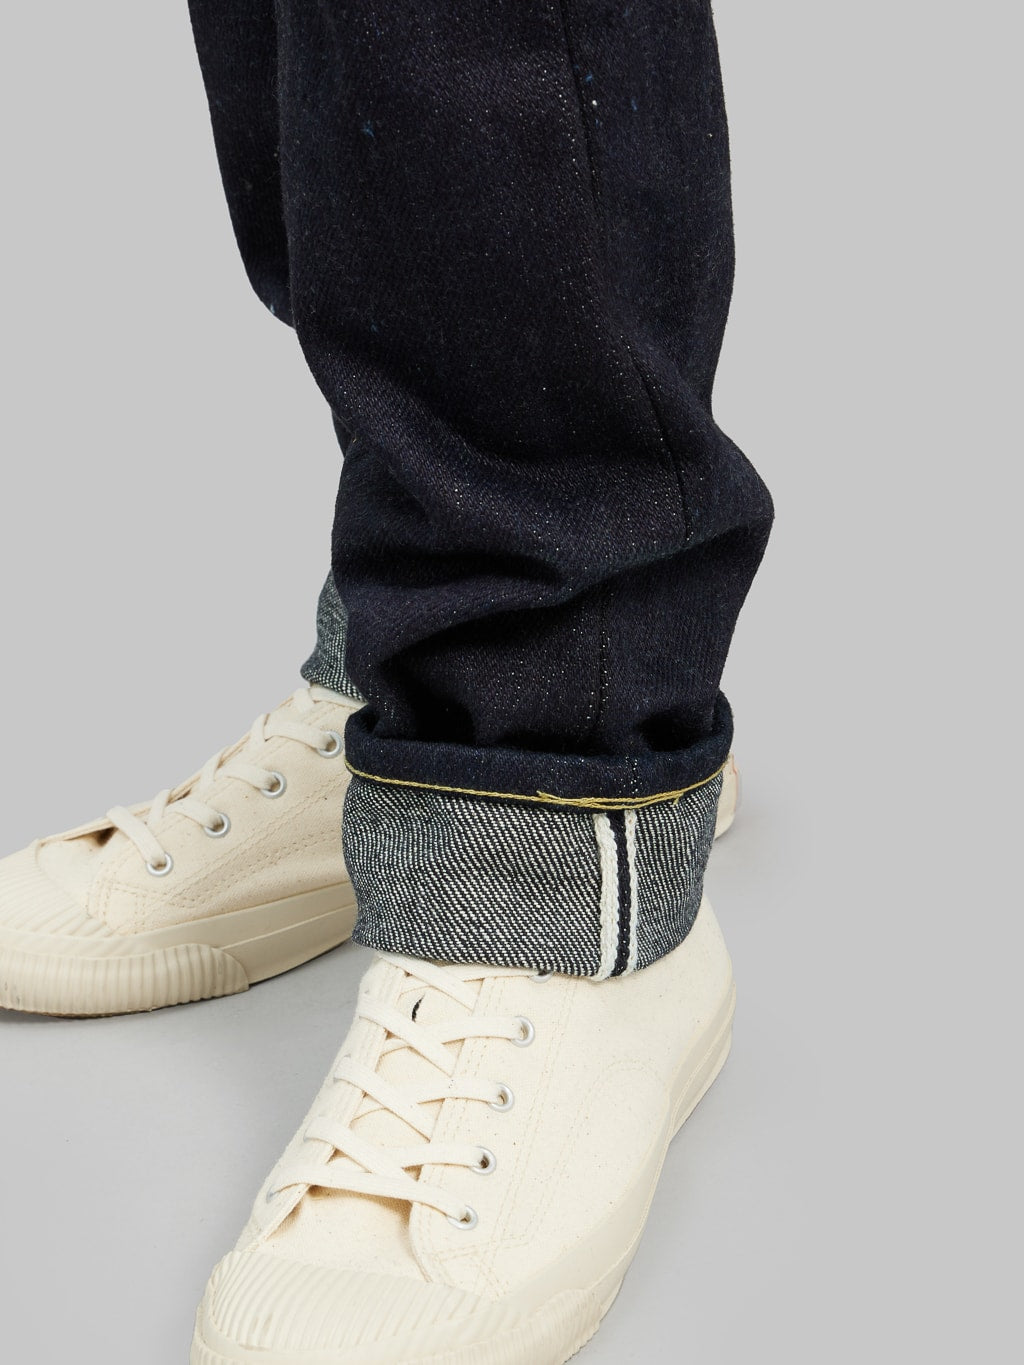 The Strike Gold Extra Heavyweight straight tapered jeans selvedge detail